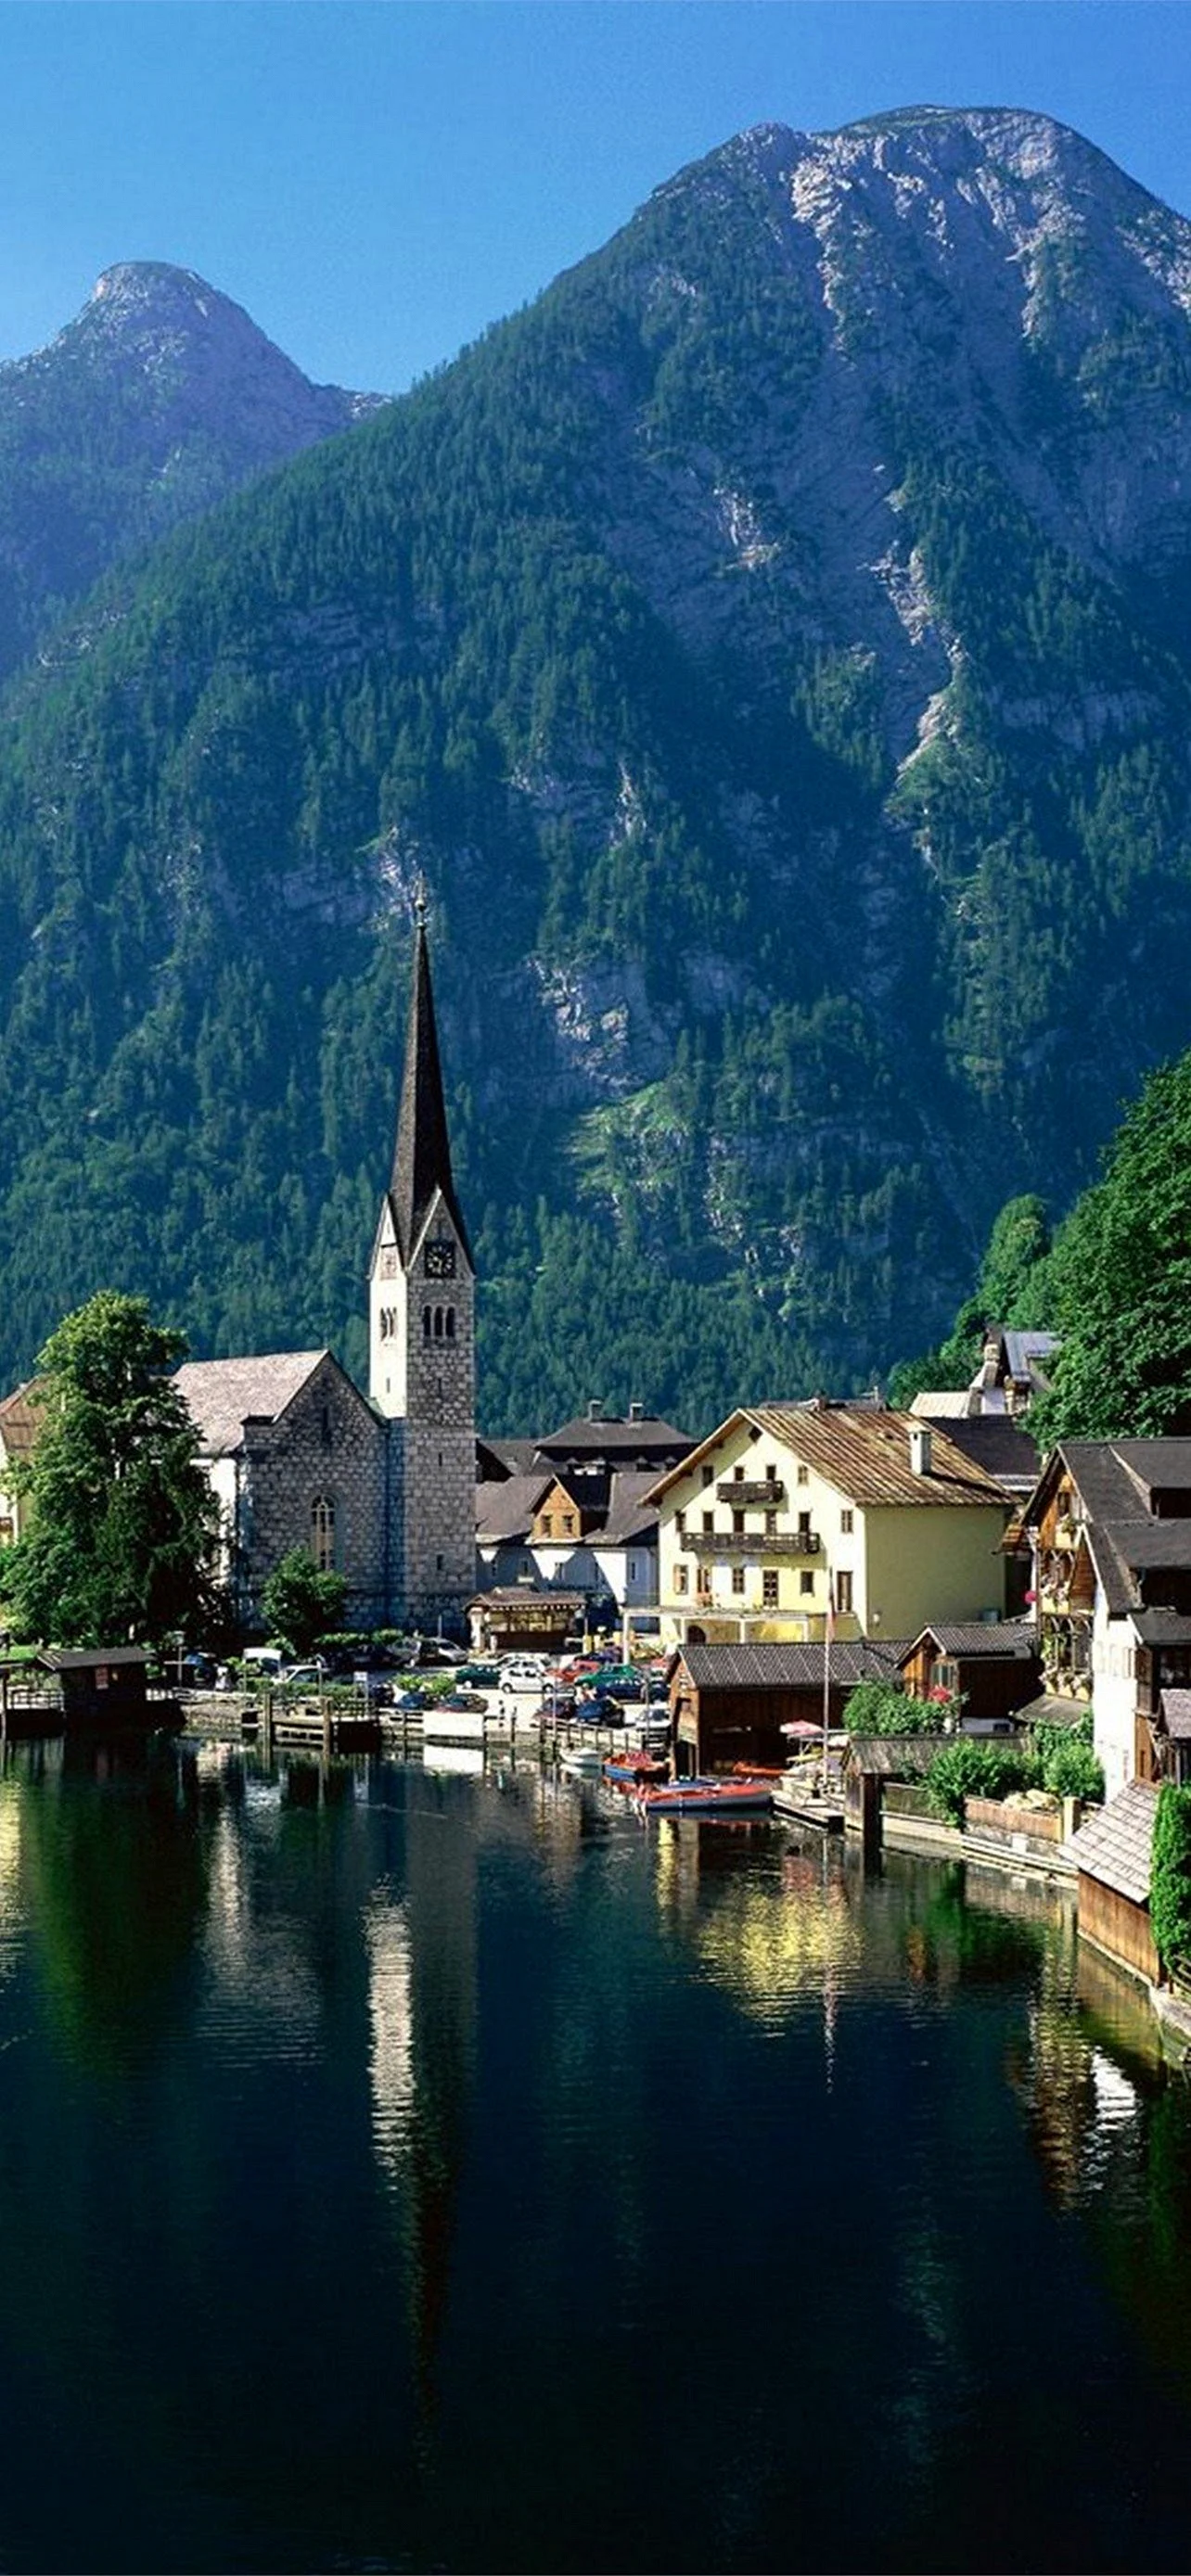 Mountain Village Wallpaper for iPhone 13 Pro Max